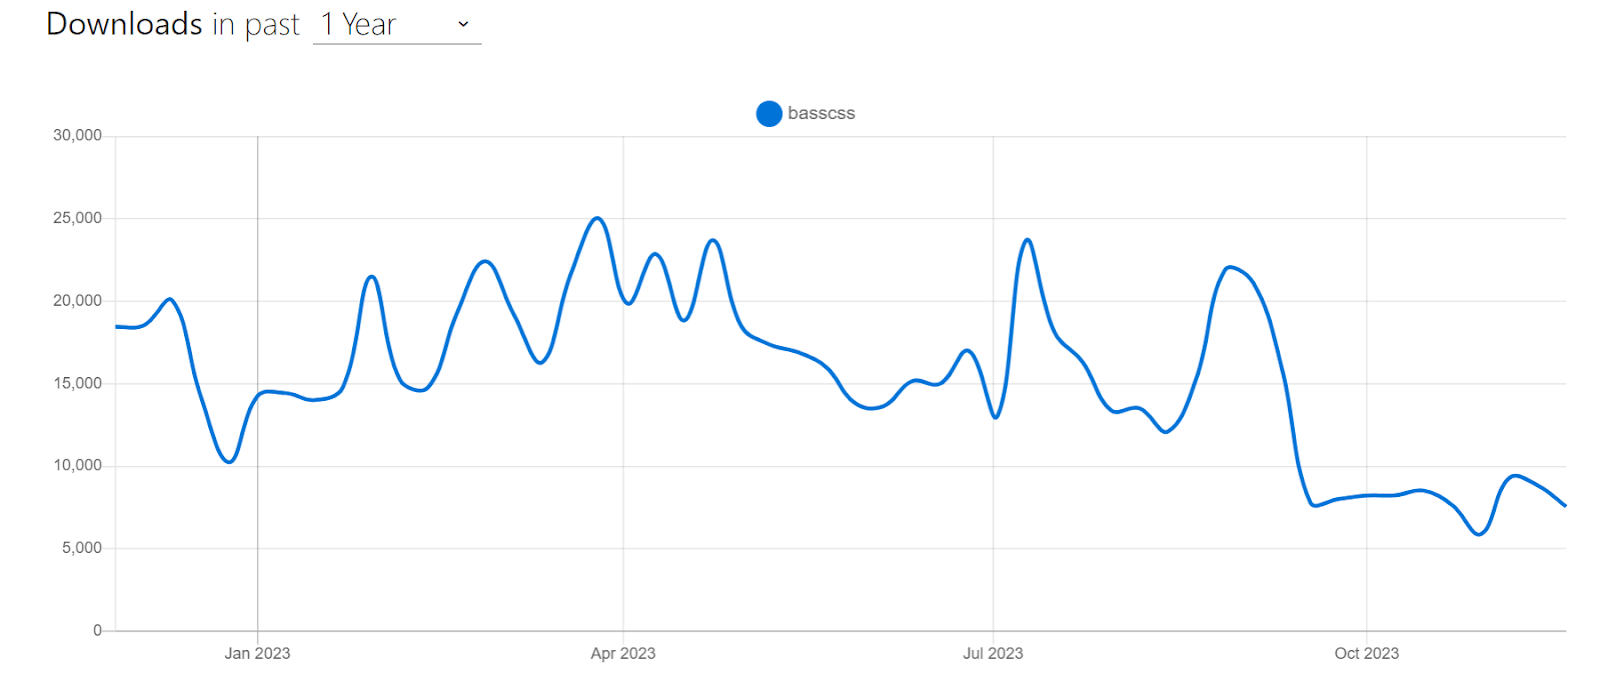 Basscss weekly downloads according to npm trends.